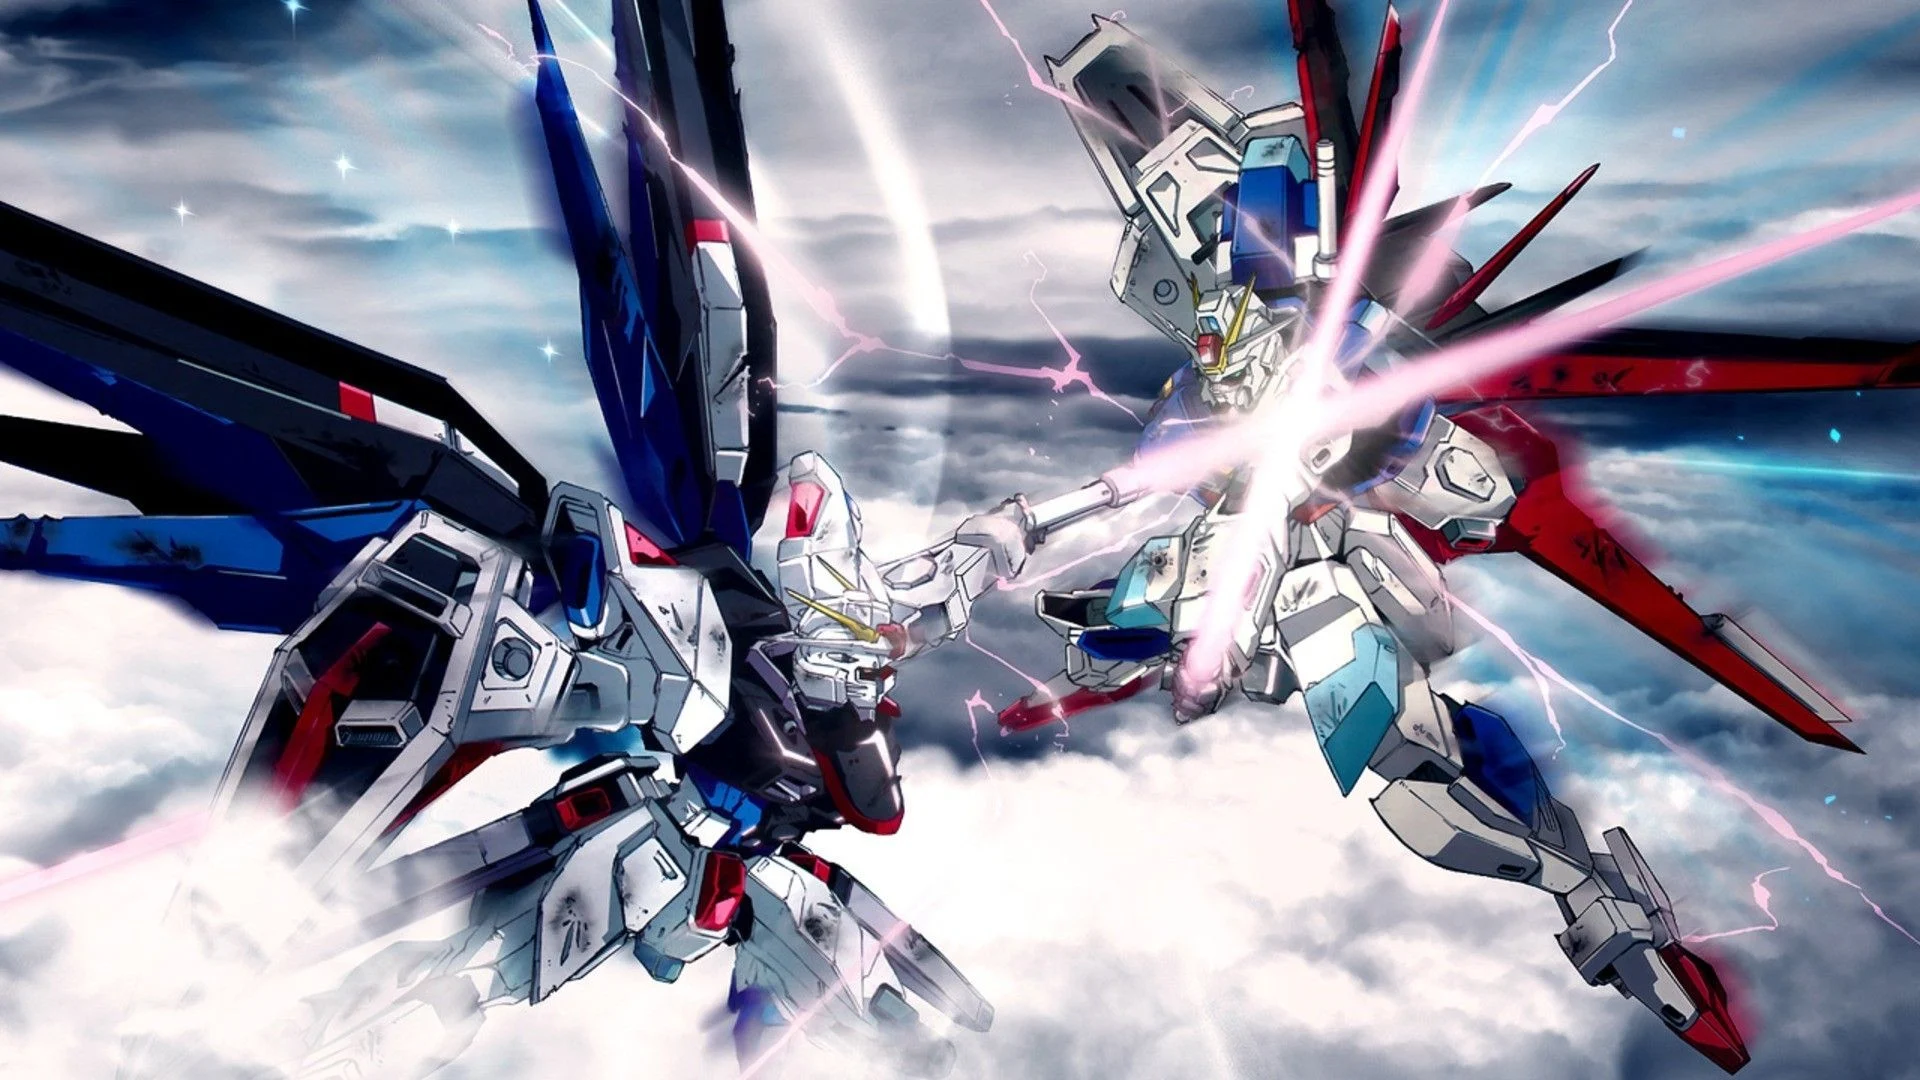 Mobile Suit Gundam in ation in the movie